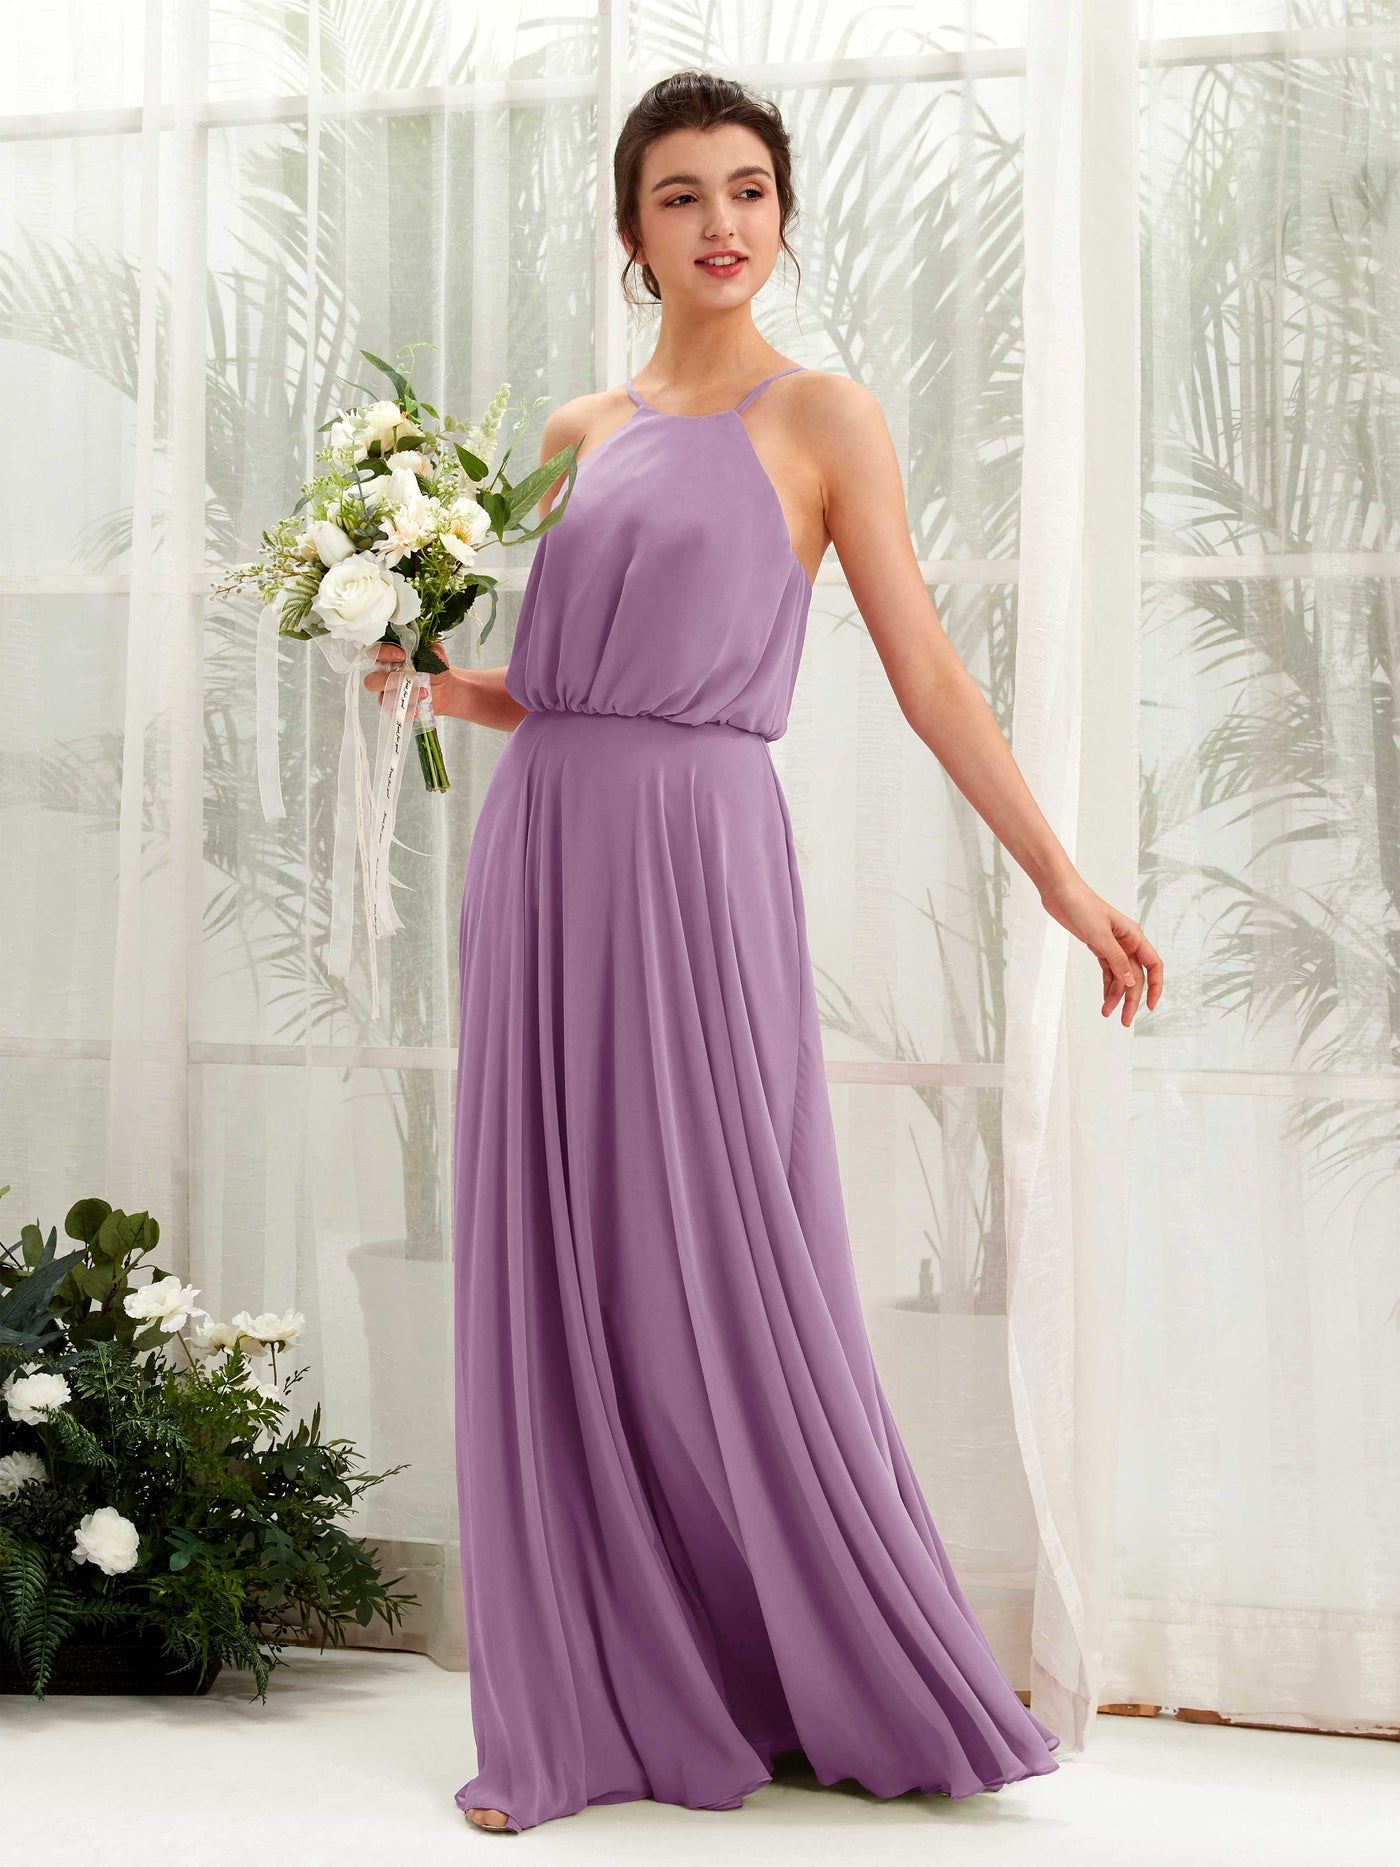 Orchid Mist Bridesmaid Dresses Bridesmaid Dress Ball Gown Chiffon Halter Full Length Sleeveless Wedding Party Dress (81223421)#color_orchid-mist